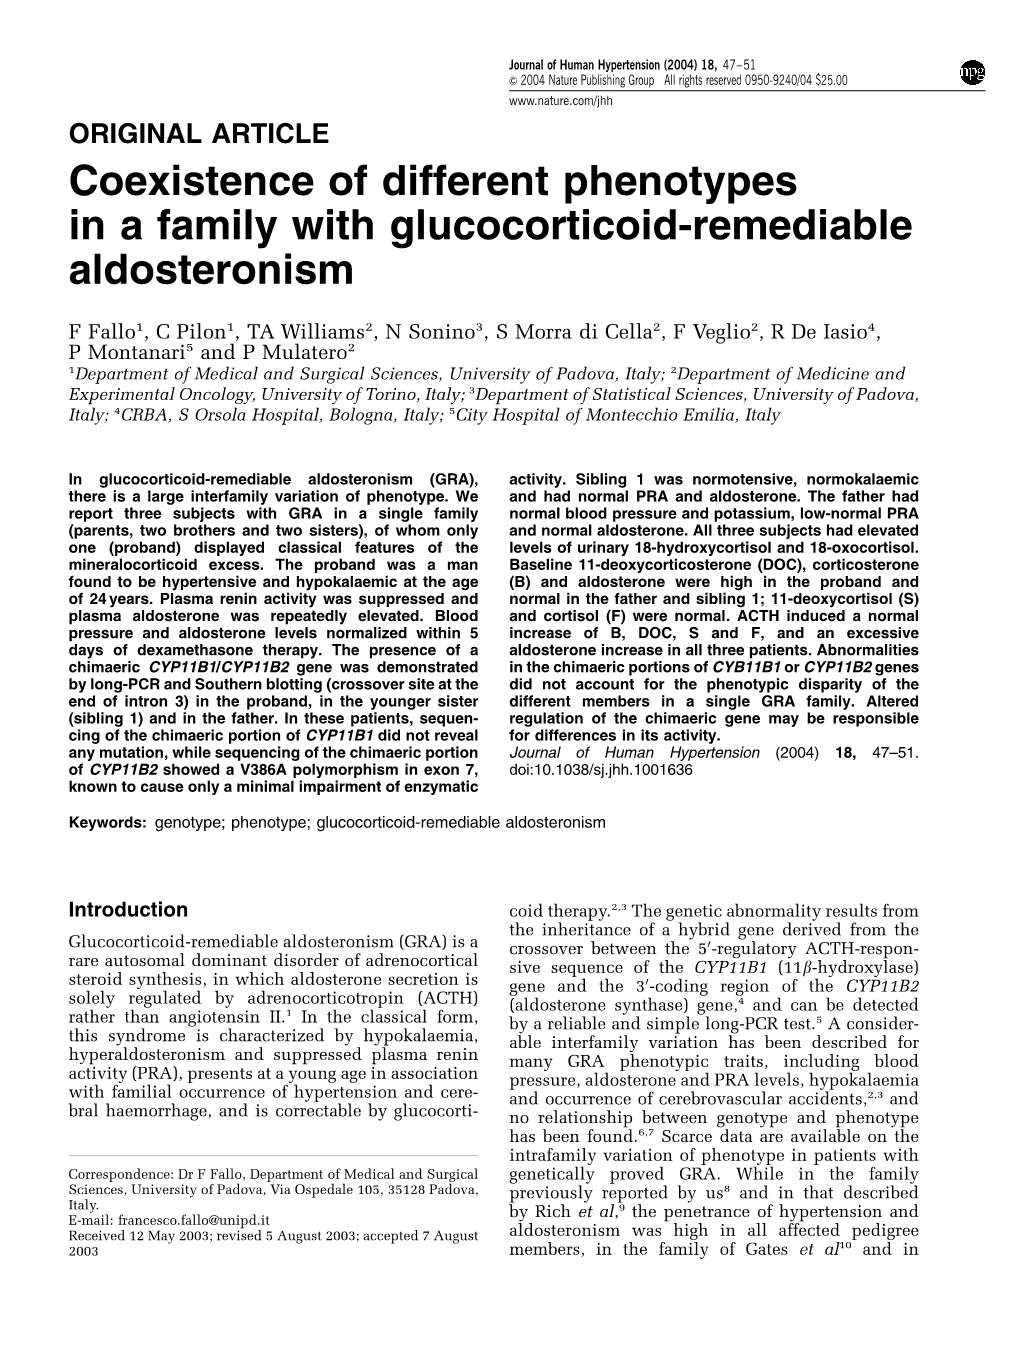 Coexistence of Different Phenotypes in a Family with Glucocorticoid-Remediable Aldosteronism